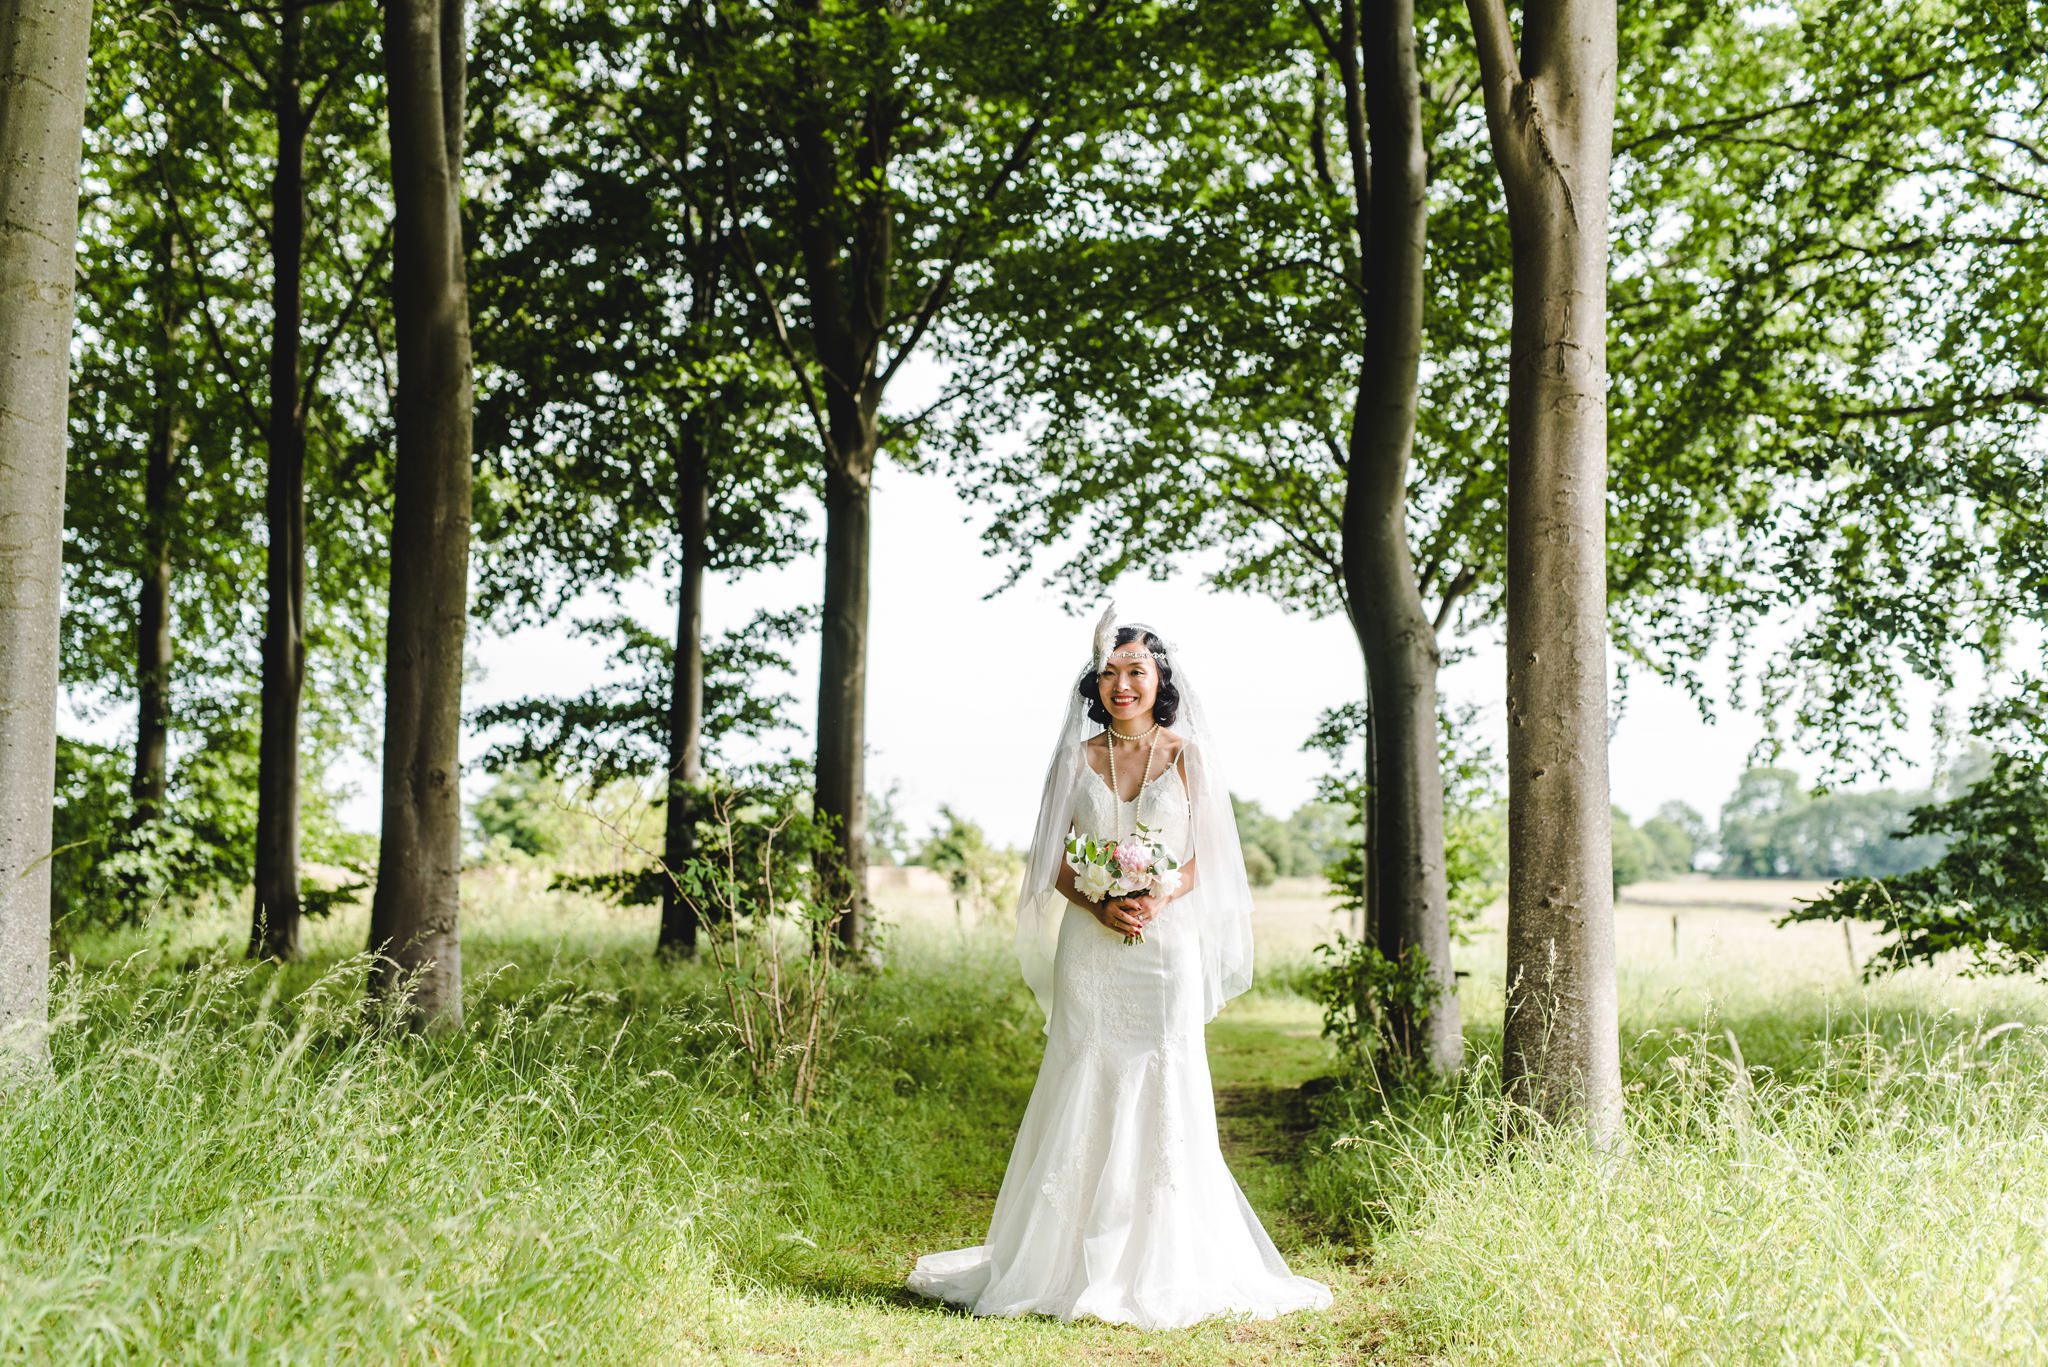 Chinese Bride photographed in woodland